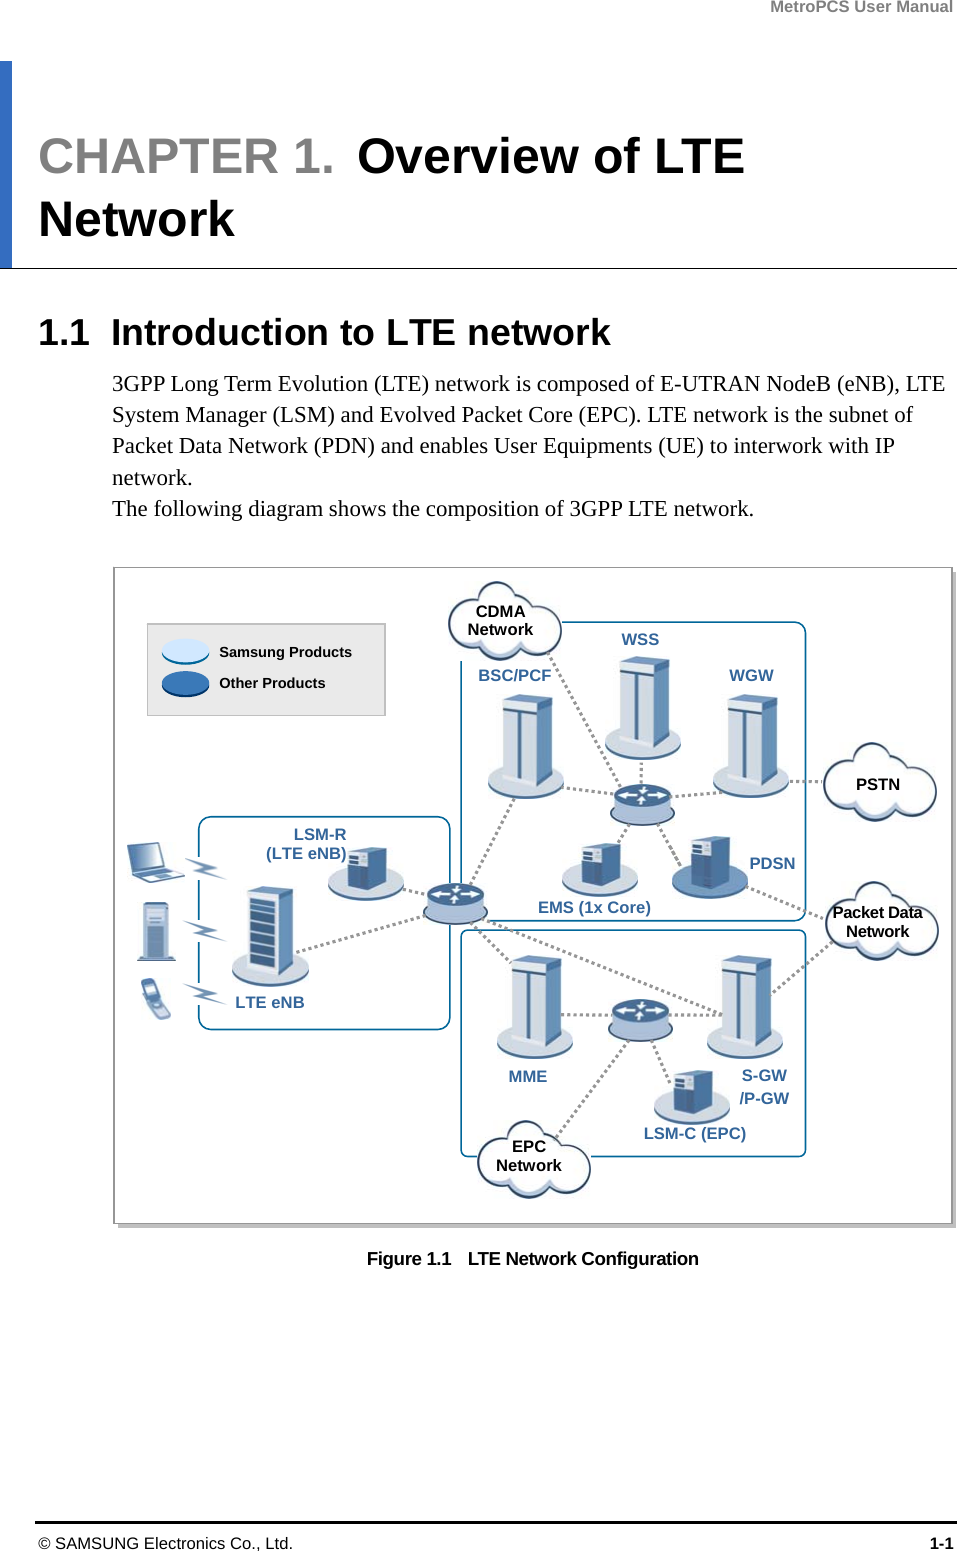 MetroPCS User Manual © SAMSUNG Electronics Co., Ltd.  1-1 CHAPTER 1.  Overview of LTE Network  1.1  Introduction to LTE network 3GPP Long Term Evolution (LTE) network is composed of E-UTRAN NodeB (eNB), LTE System Manager (LSM) and Evolved Packet Core (EPC). LTE network is the subnet of Packet Data Network (PDN) and enables User Equipments (UE) to interwork with IP network. The following diagram shows the composition of 3GPP LTE network.  Figure 1.1    LTE Network Configuration  PSTN Packet DataNetwork LTE eNB LSM-R (LTE eNB) BSC/PCF WSS WGW EMS (1x Core) PDSN MME  S-GW /P-GWLSM-C (EPC) Samsung Products Other Products EPCNetwork  CDMANetwork 